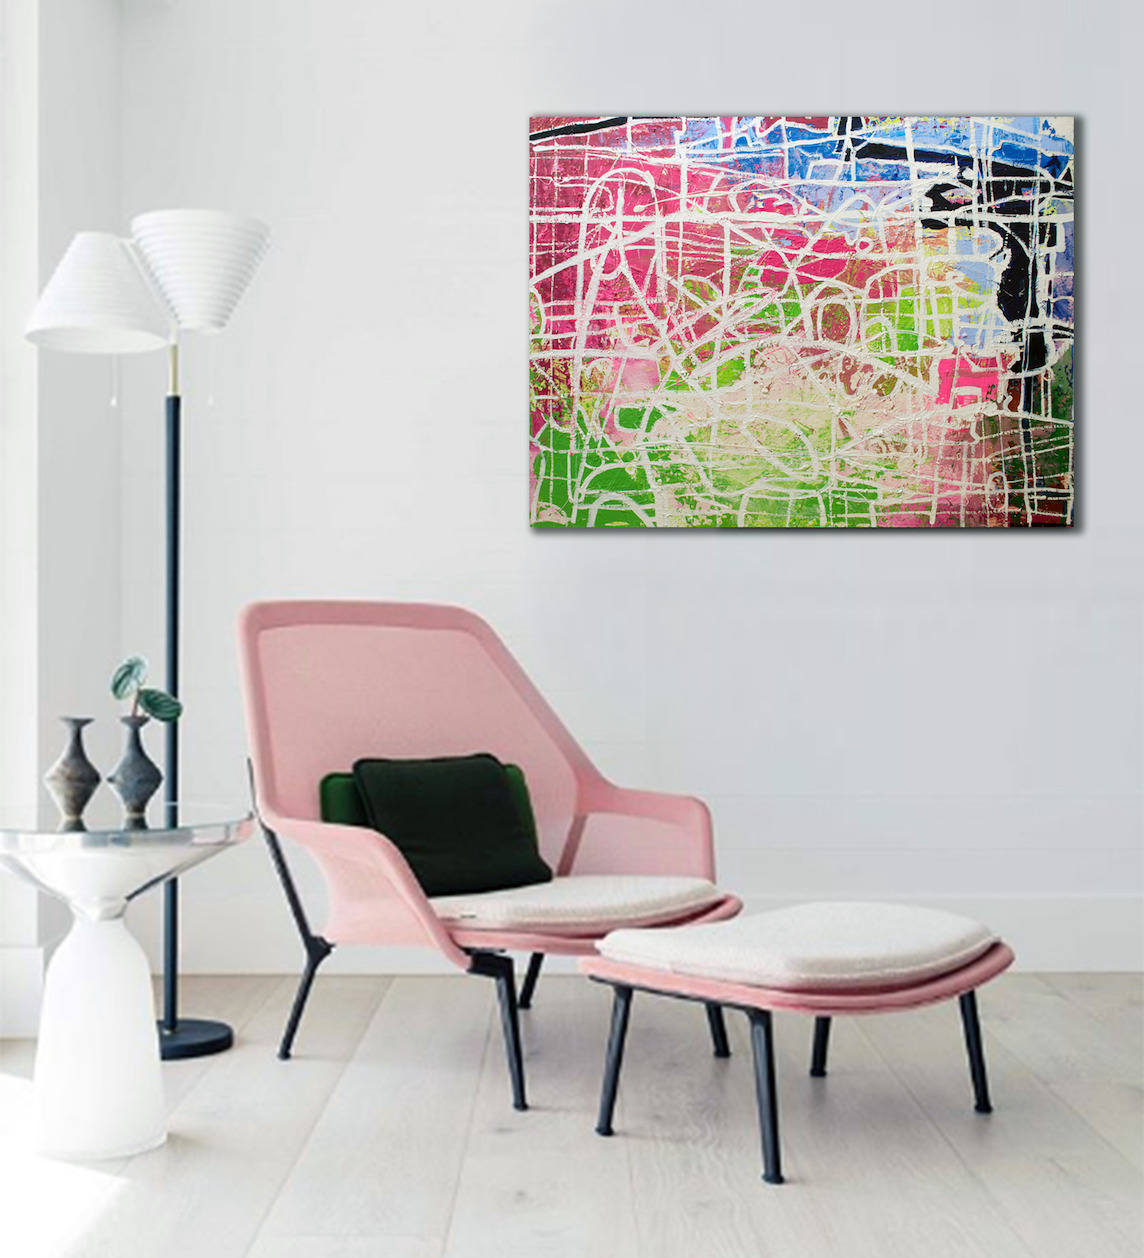 Wall Design Ideas With Abstract Painting "Mapping My Way out" By Judith Dalozzo